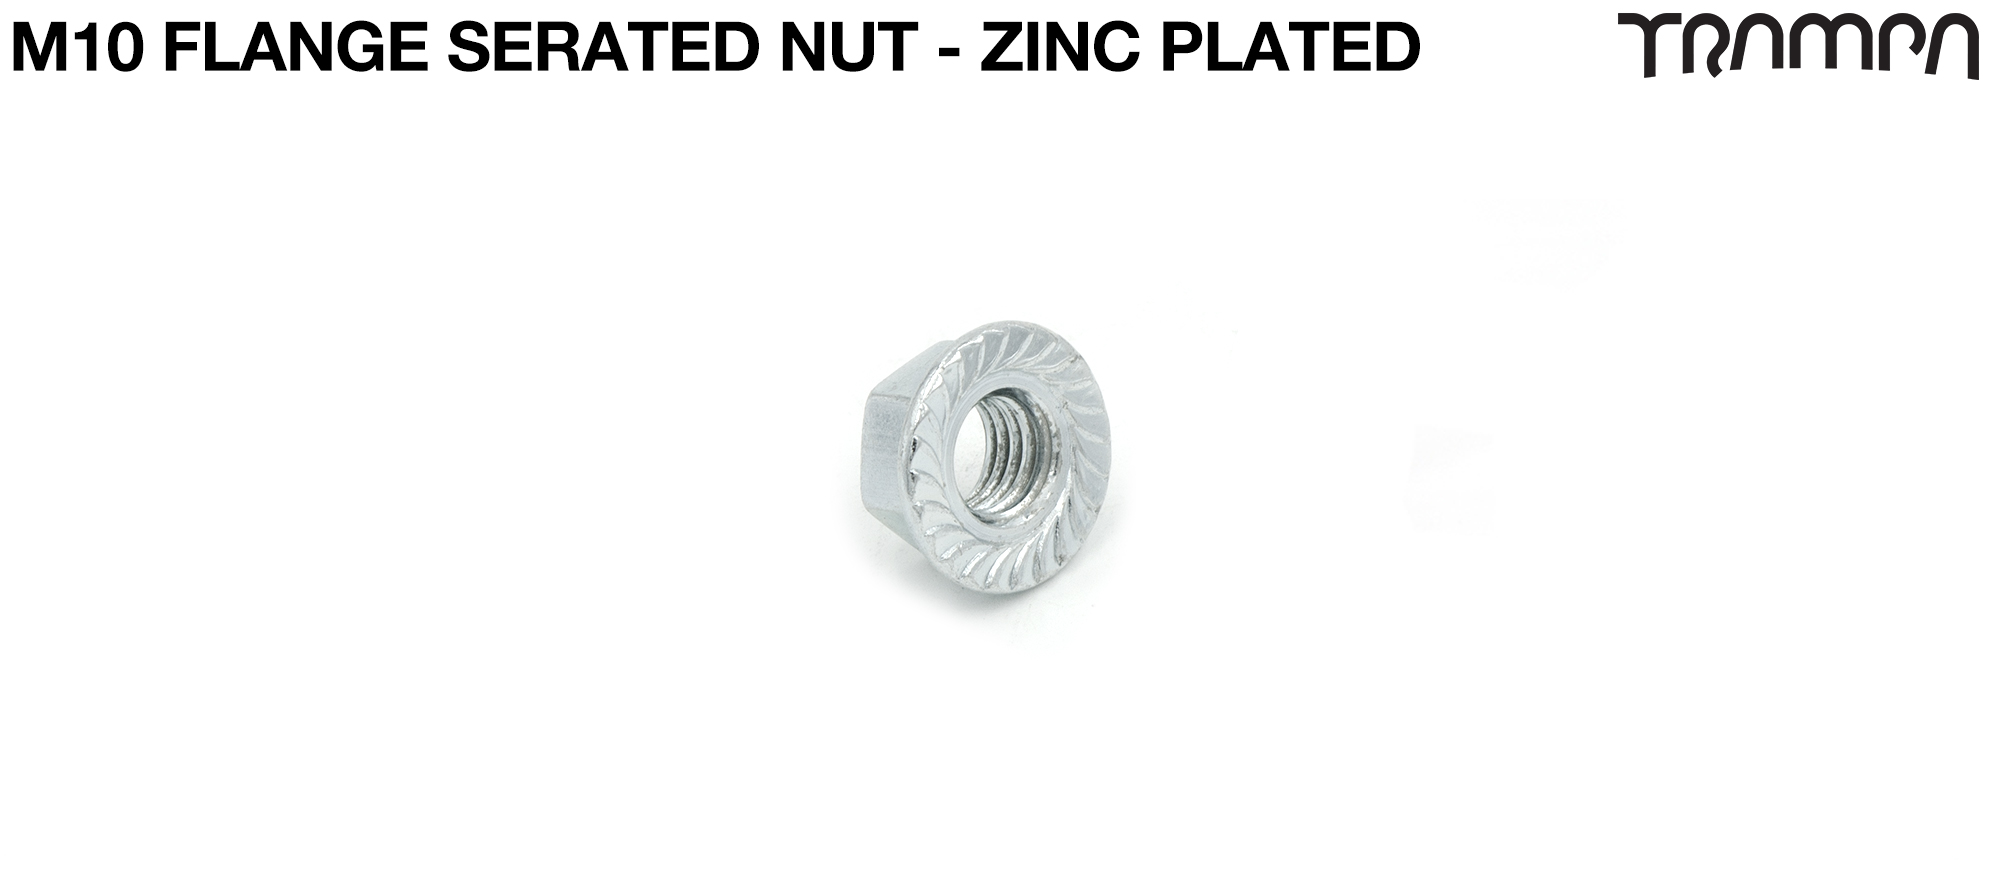 M10 Flanged Scerated Nut